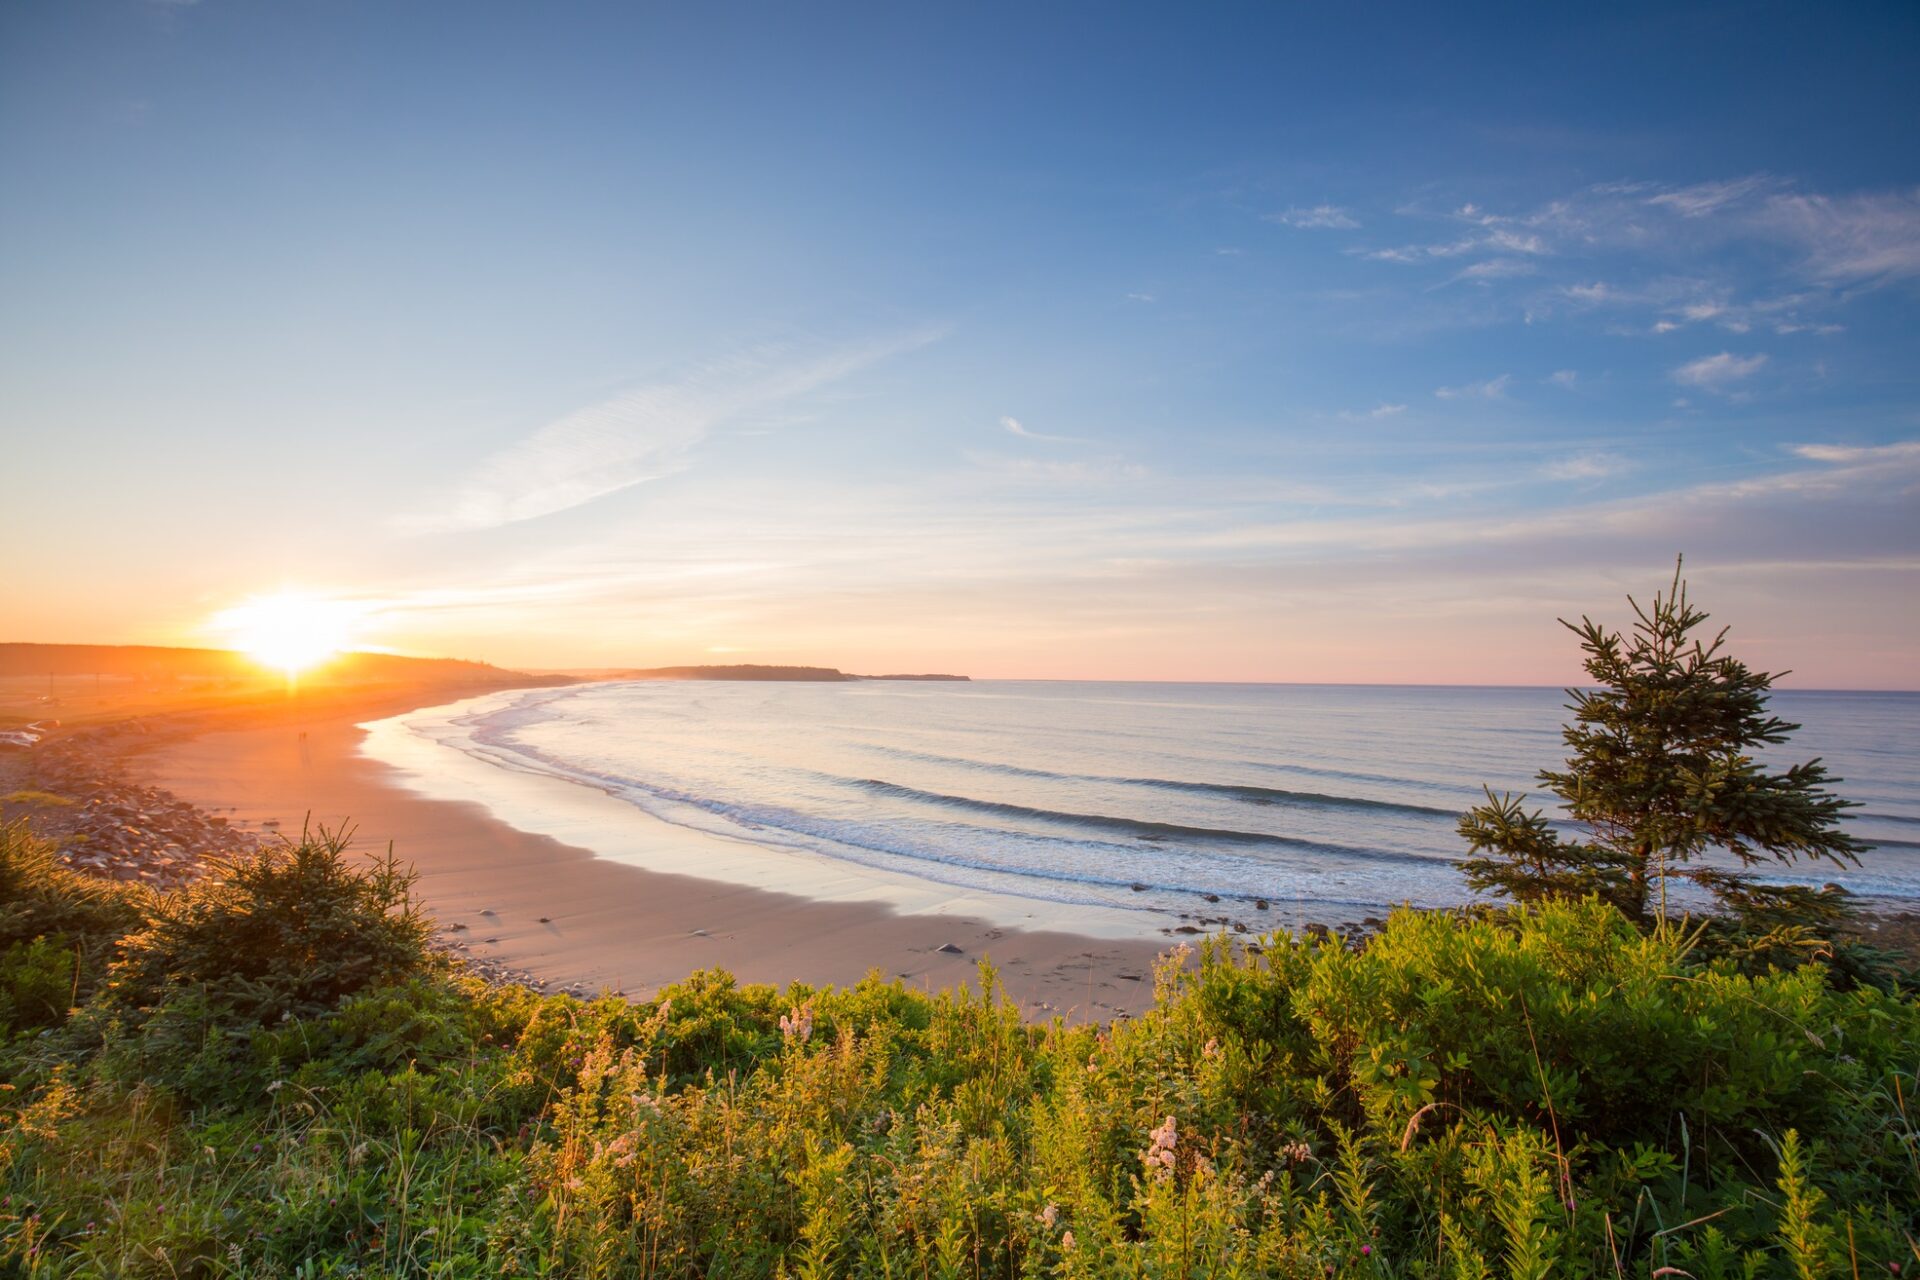 Lawrencetown Beach, Nova Scotia at sunset on our Halifax road trip 